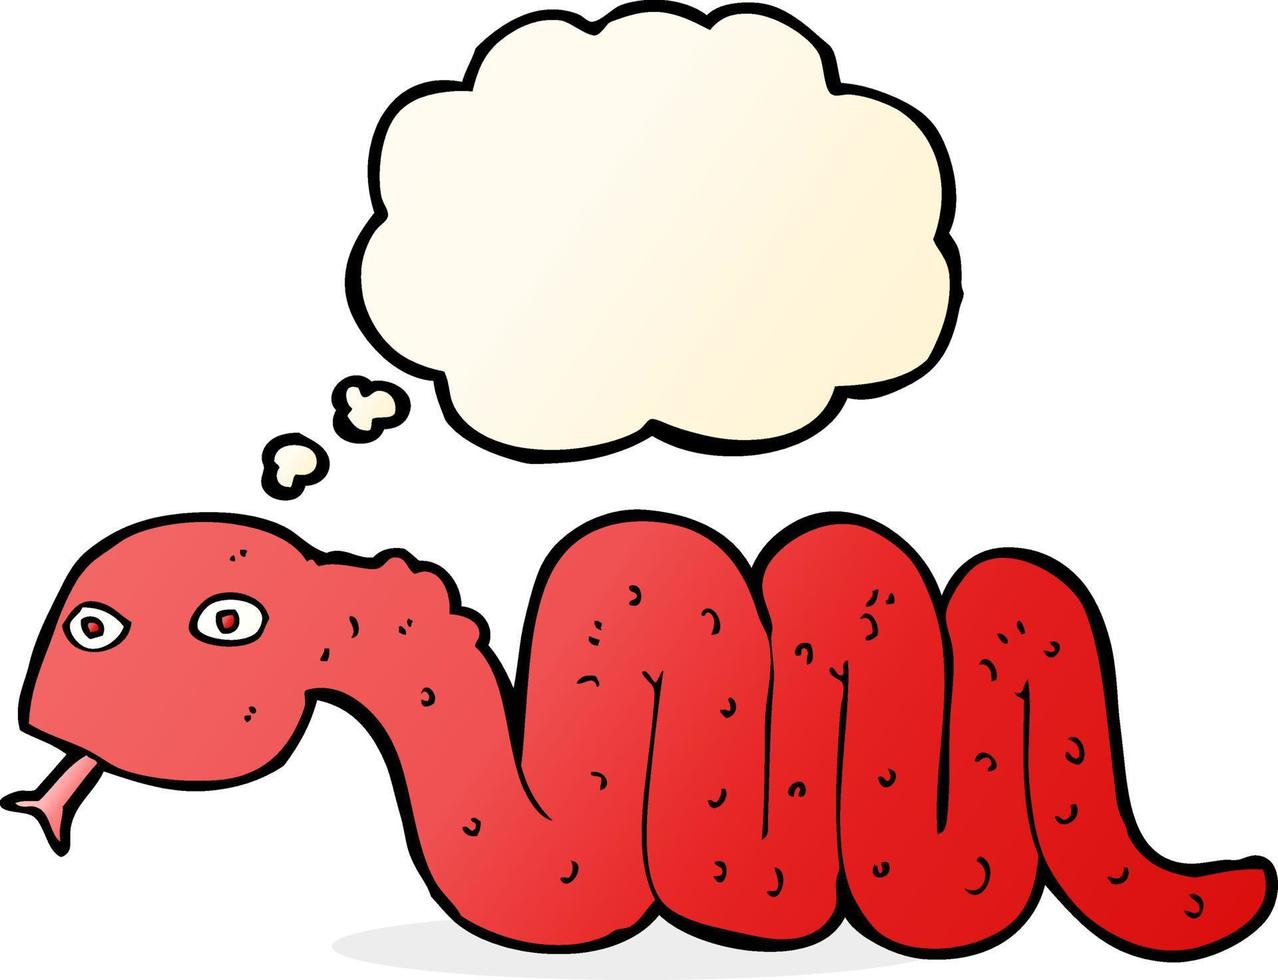 funny cartoon snake with thought bubble vector